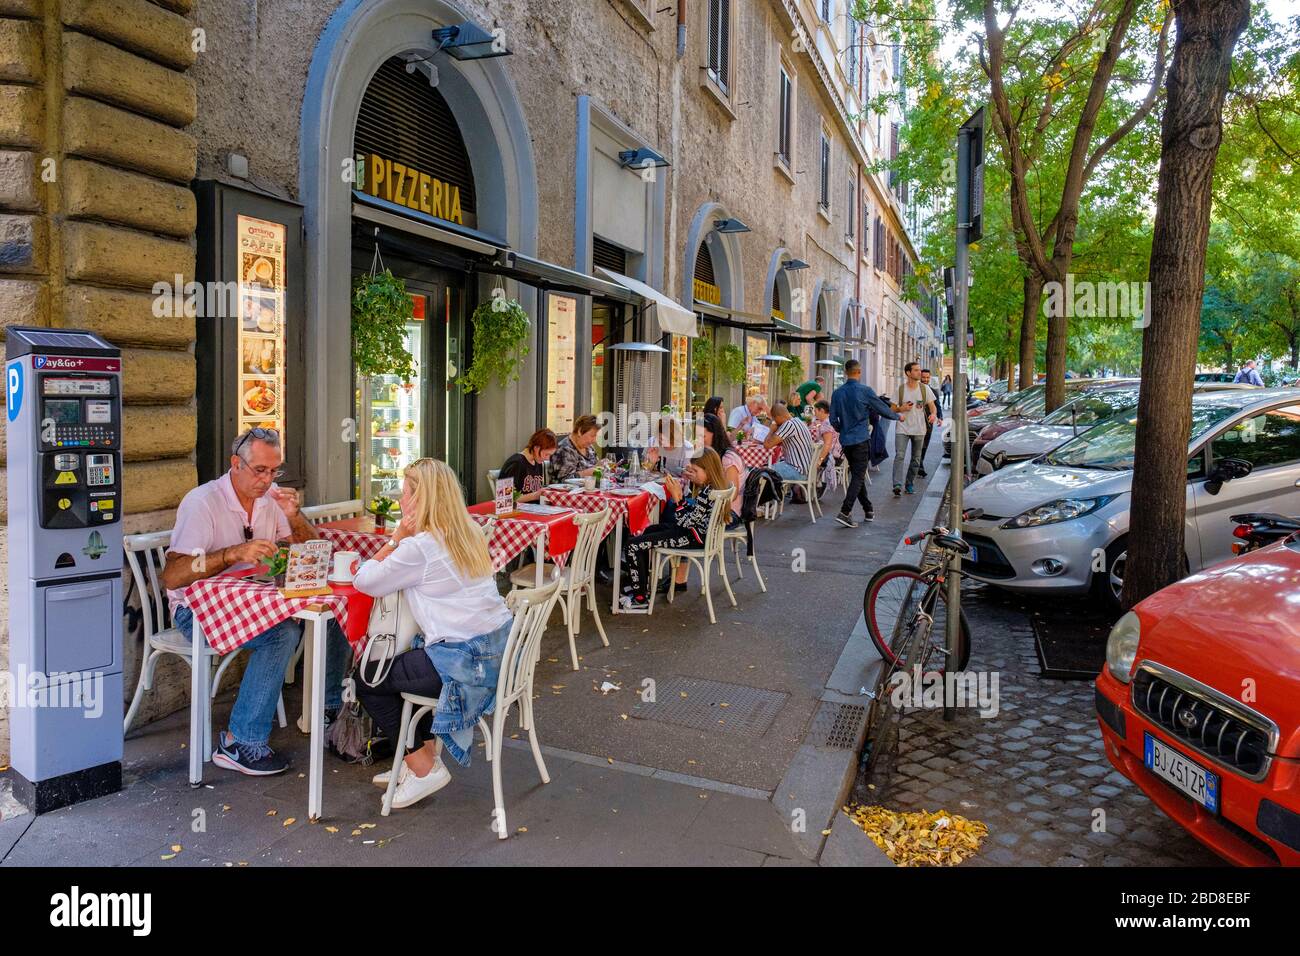 Alfresco dining, people eating on outside tables on the sidewalk at Ottavio Pizza e Spaghetti pizzeria in Rome, Italy. Stock Photo